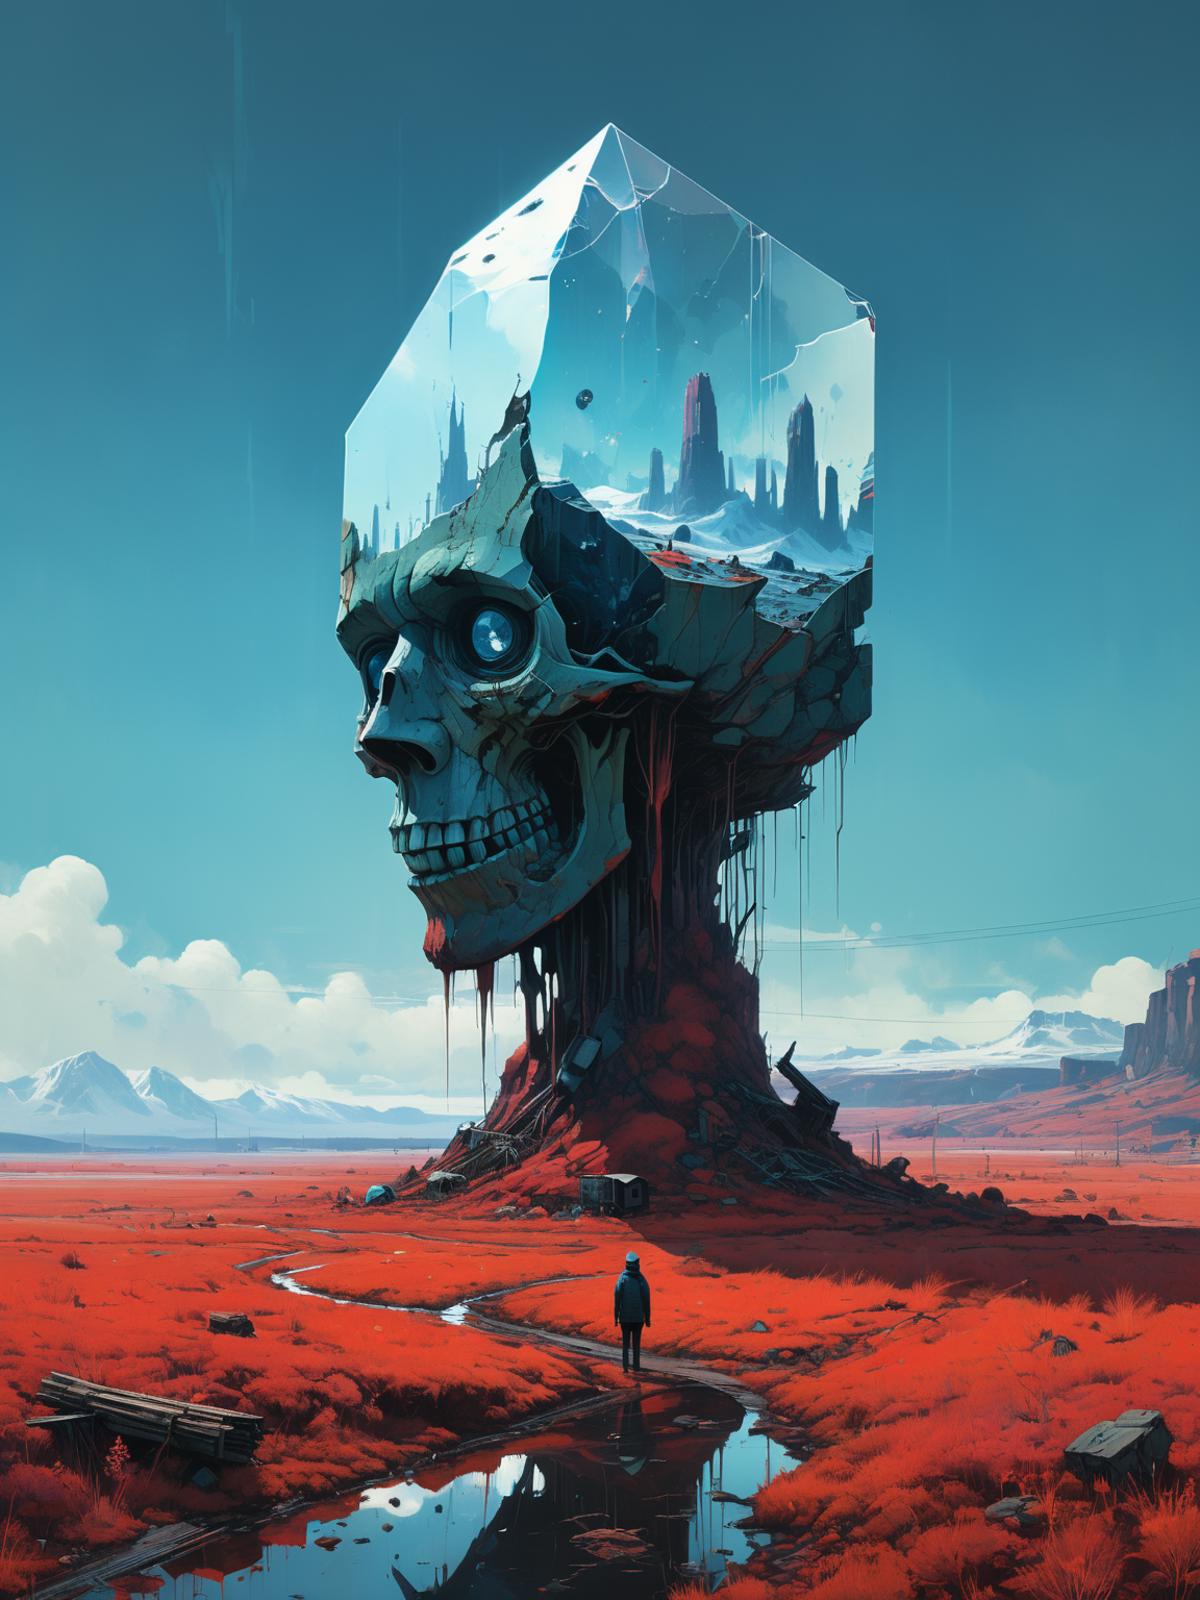 A person standing in front of a massive skull sculpture in a desert landscape.